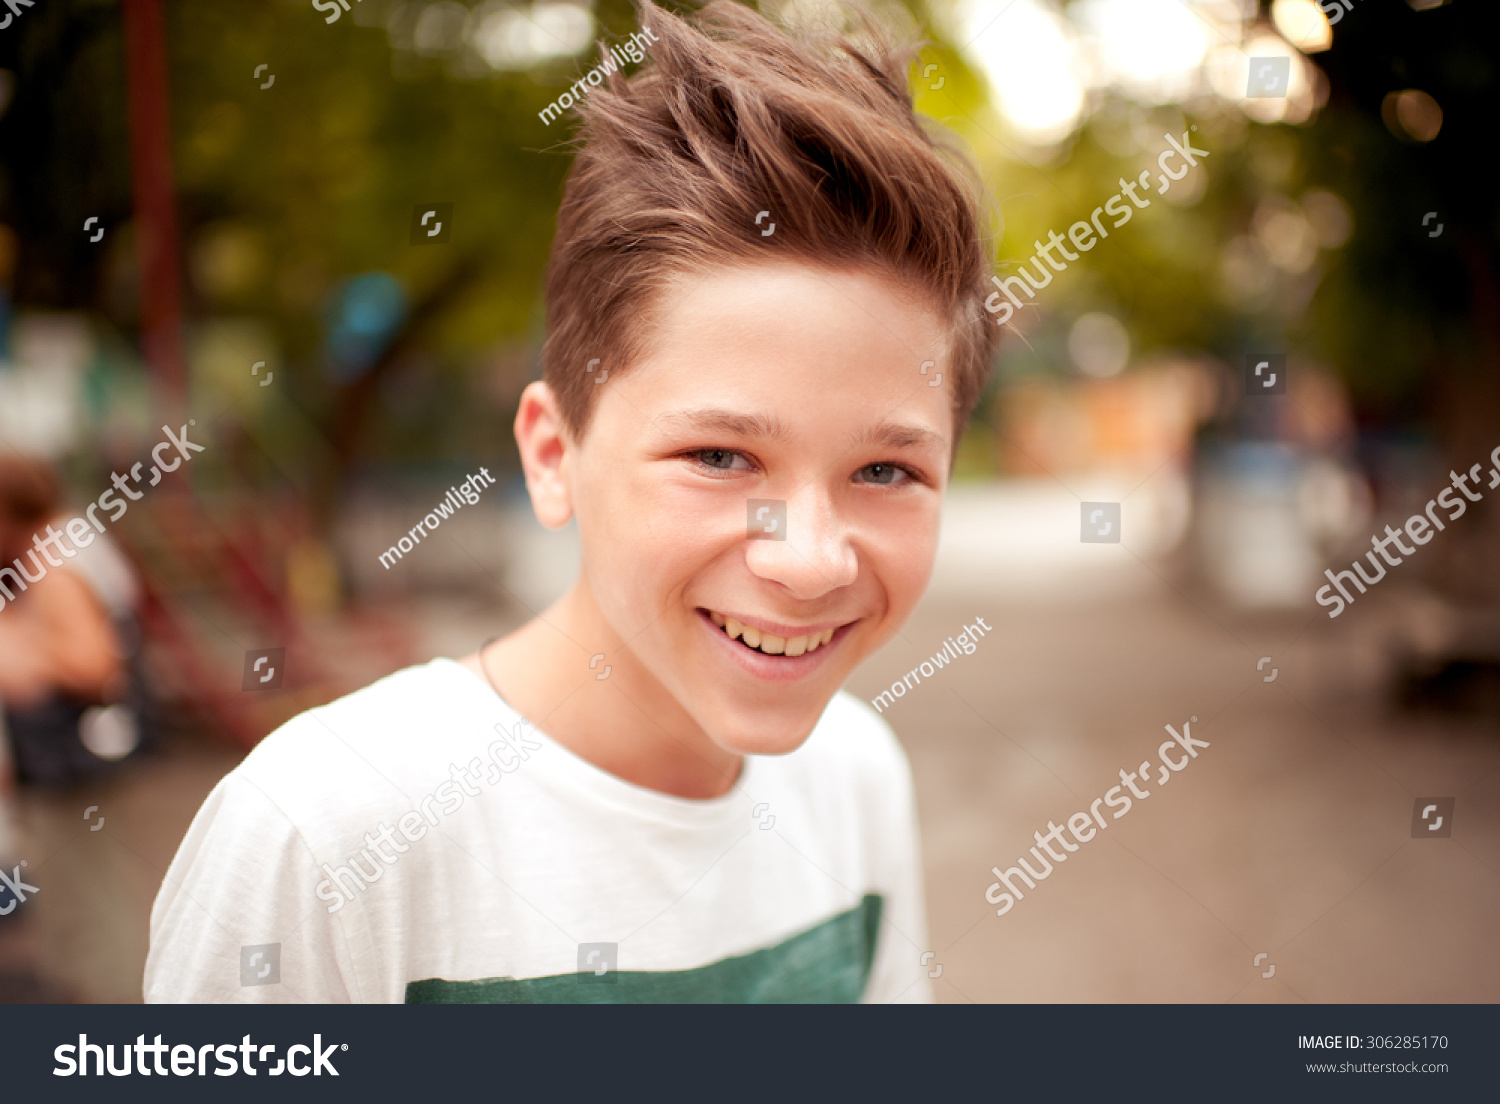 Smiling kid boy with stylish hairstyle outdoors. Looking at camera. Teenage boy #306285170